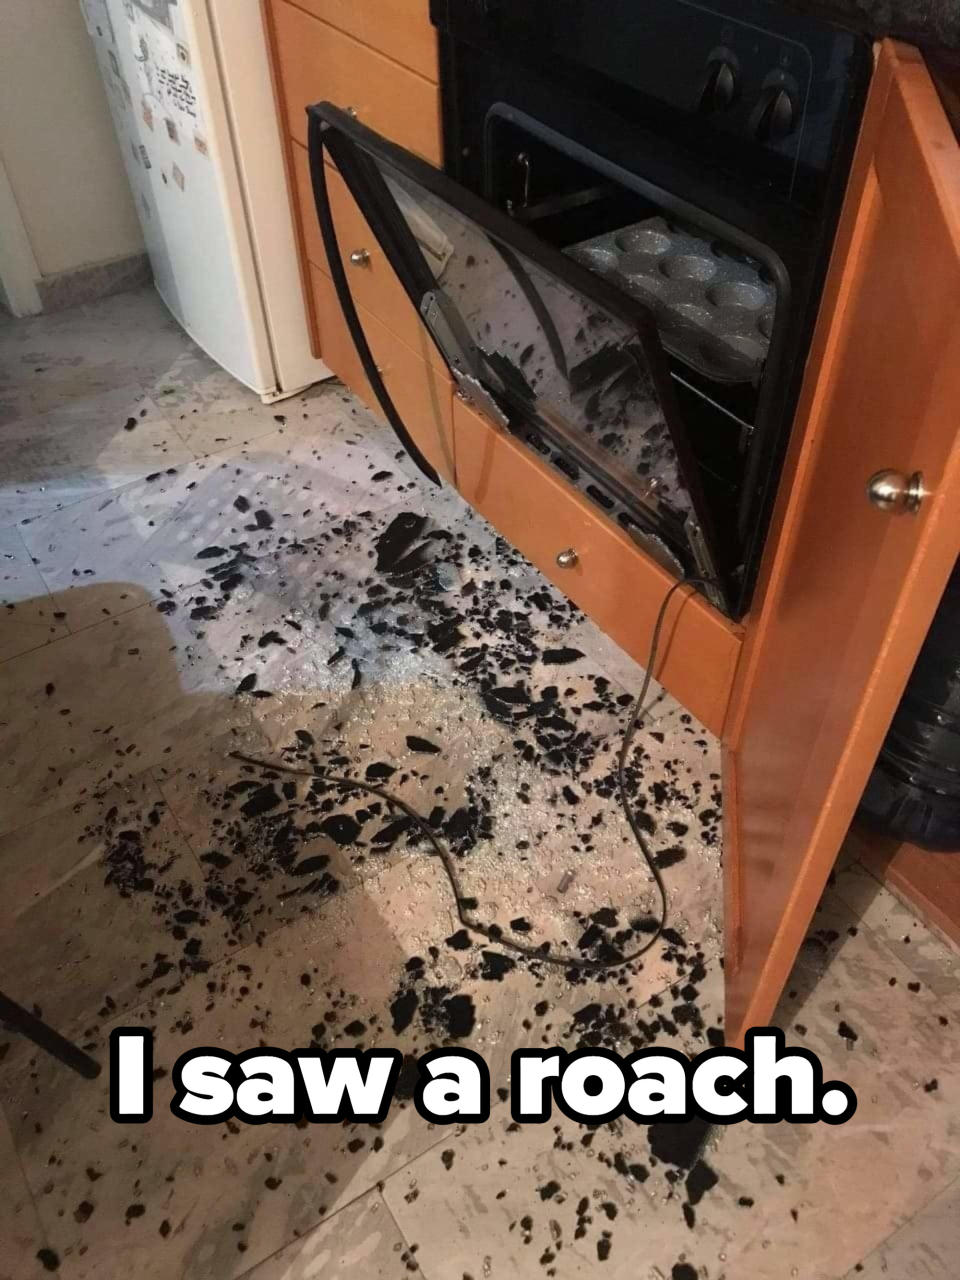 smashed oven with the caption i saw a roach